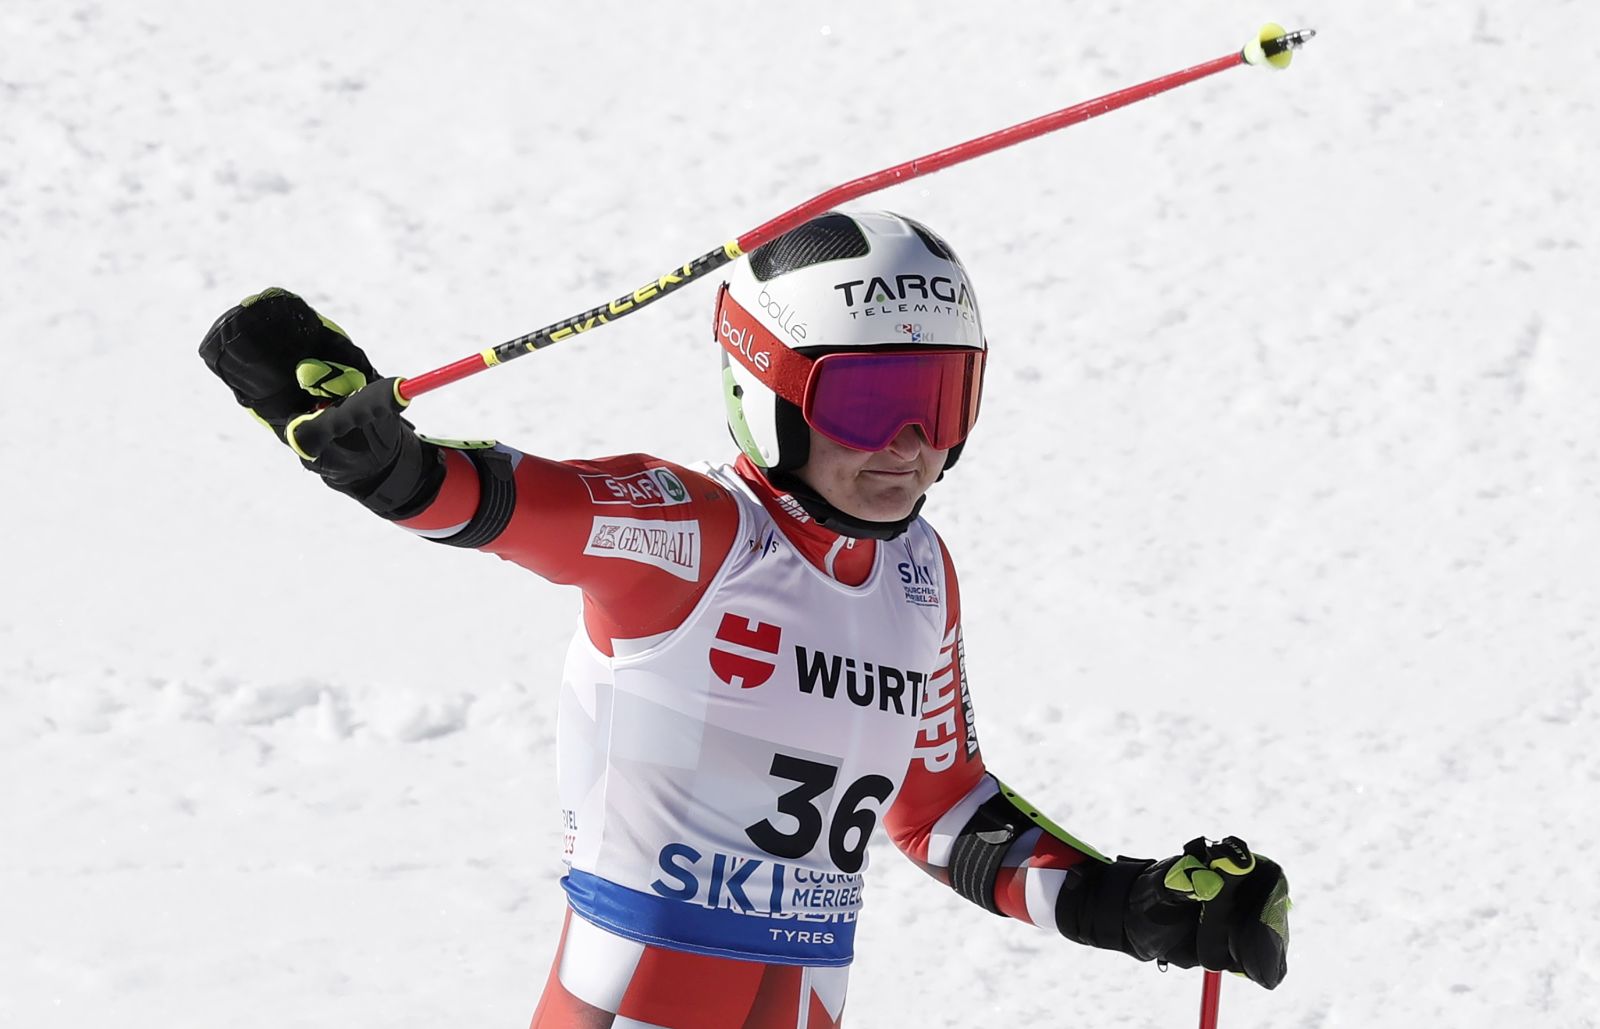 epa10470354 Zrinka Ljutic of Croatia waves in the finish area after the 2nd run in the Women's Giant Slalom event at the FIS Alpine Skiing World Championships in Meribel, France, 16 February 2023.  EPA/GUILLAUME HORCAJUELO